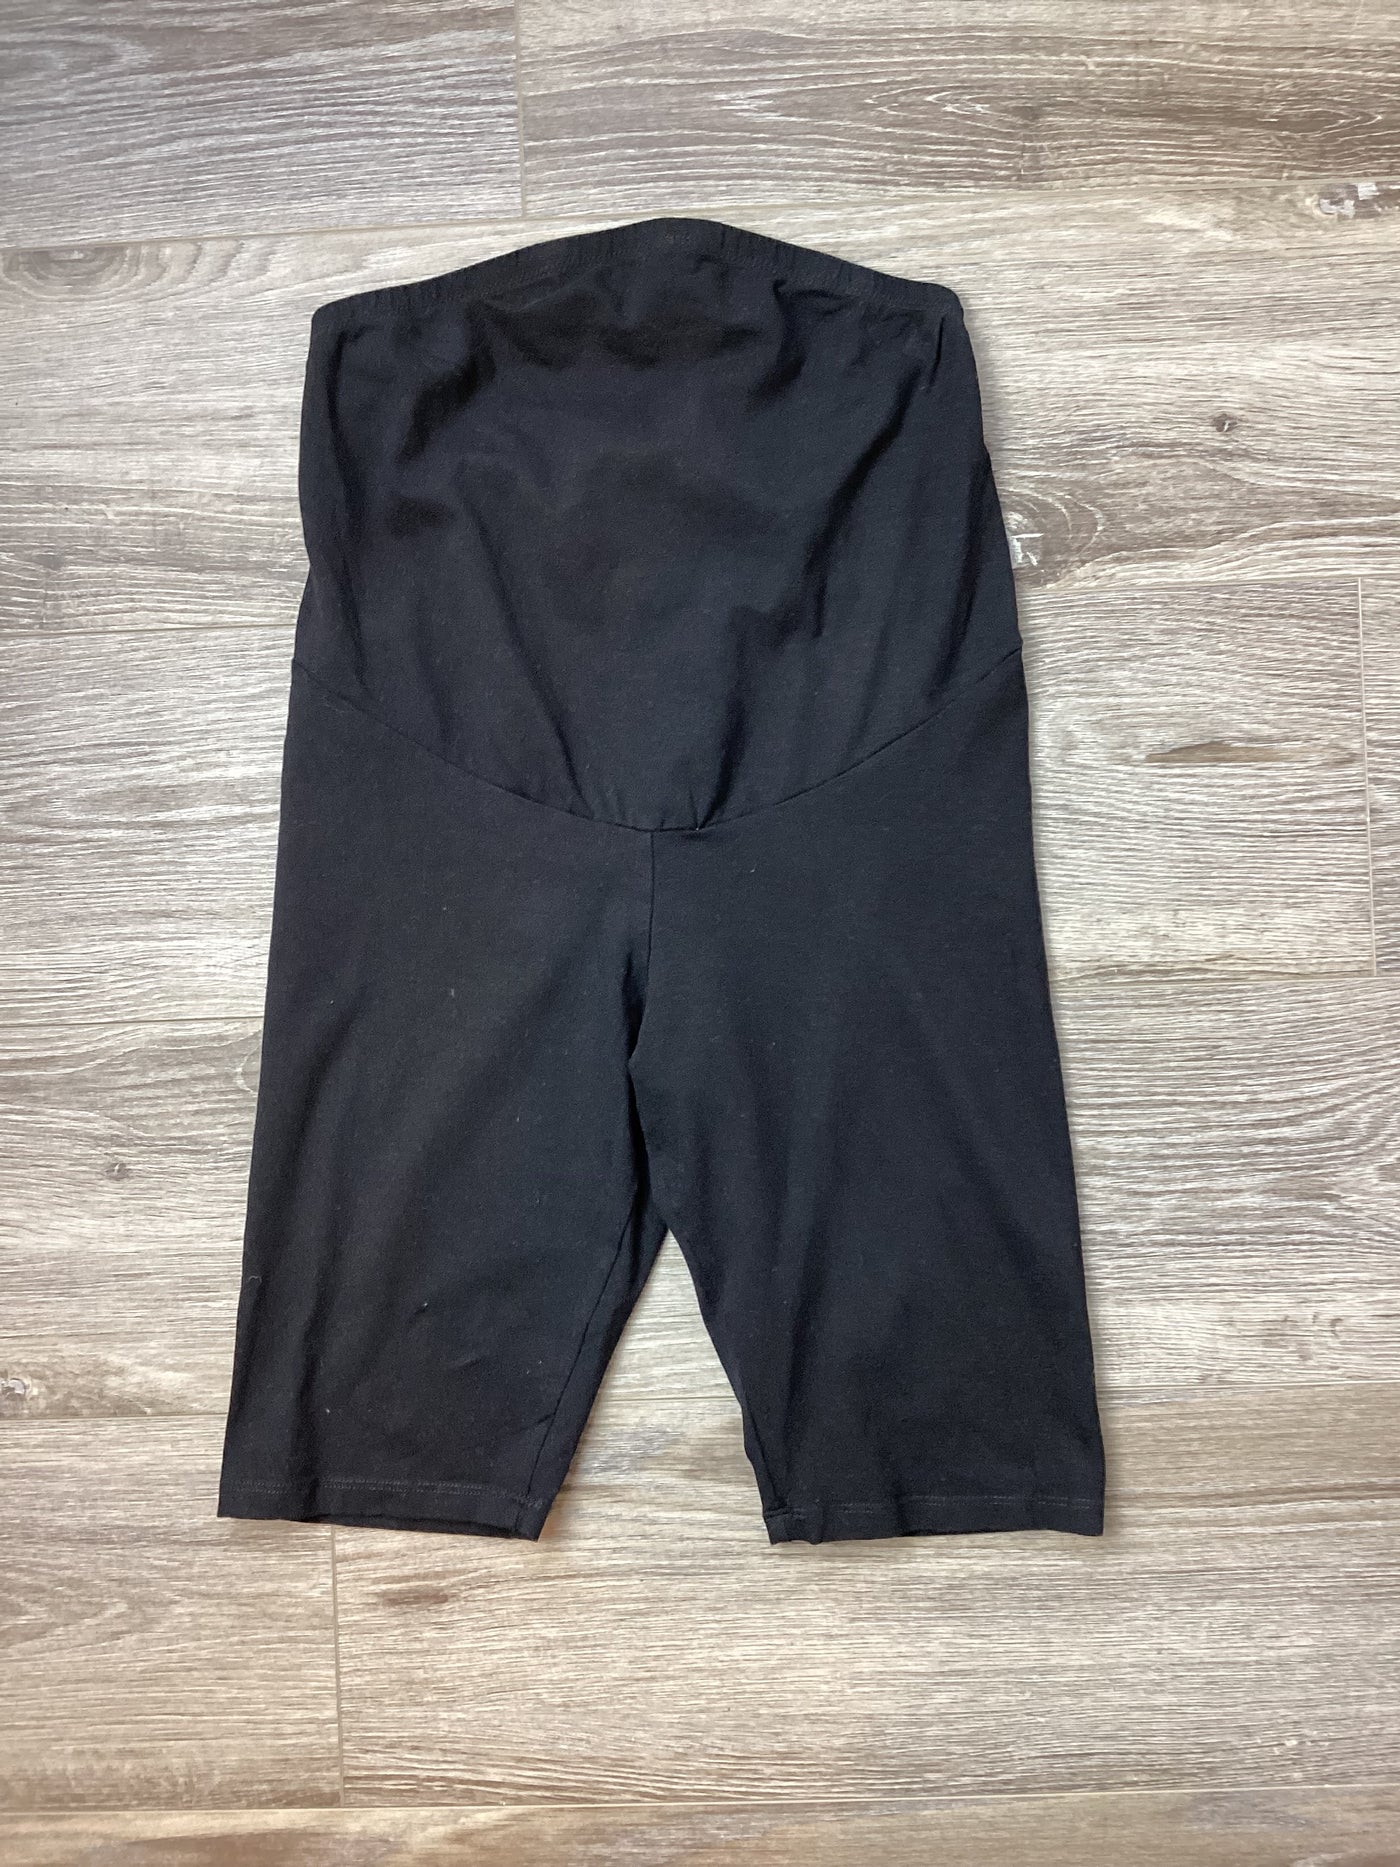 H&M Mama black overbump cycle shorts - Size S (Approx UK 8/10)